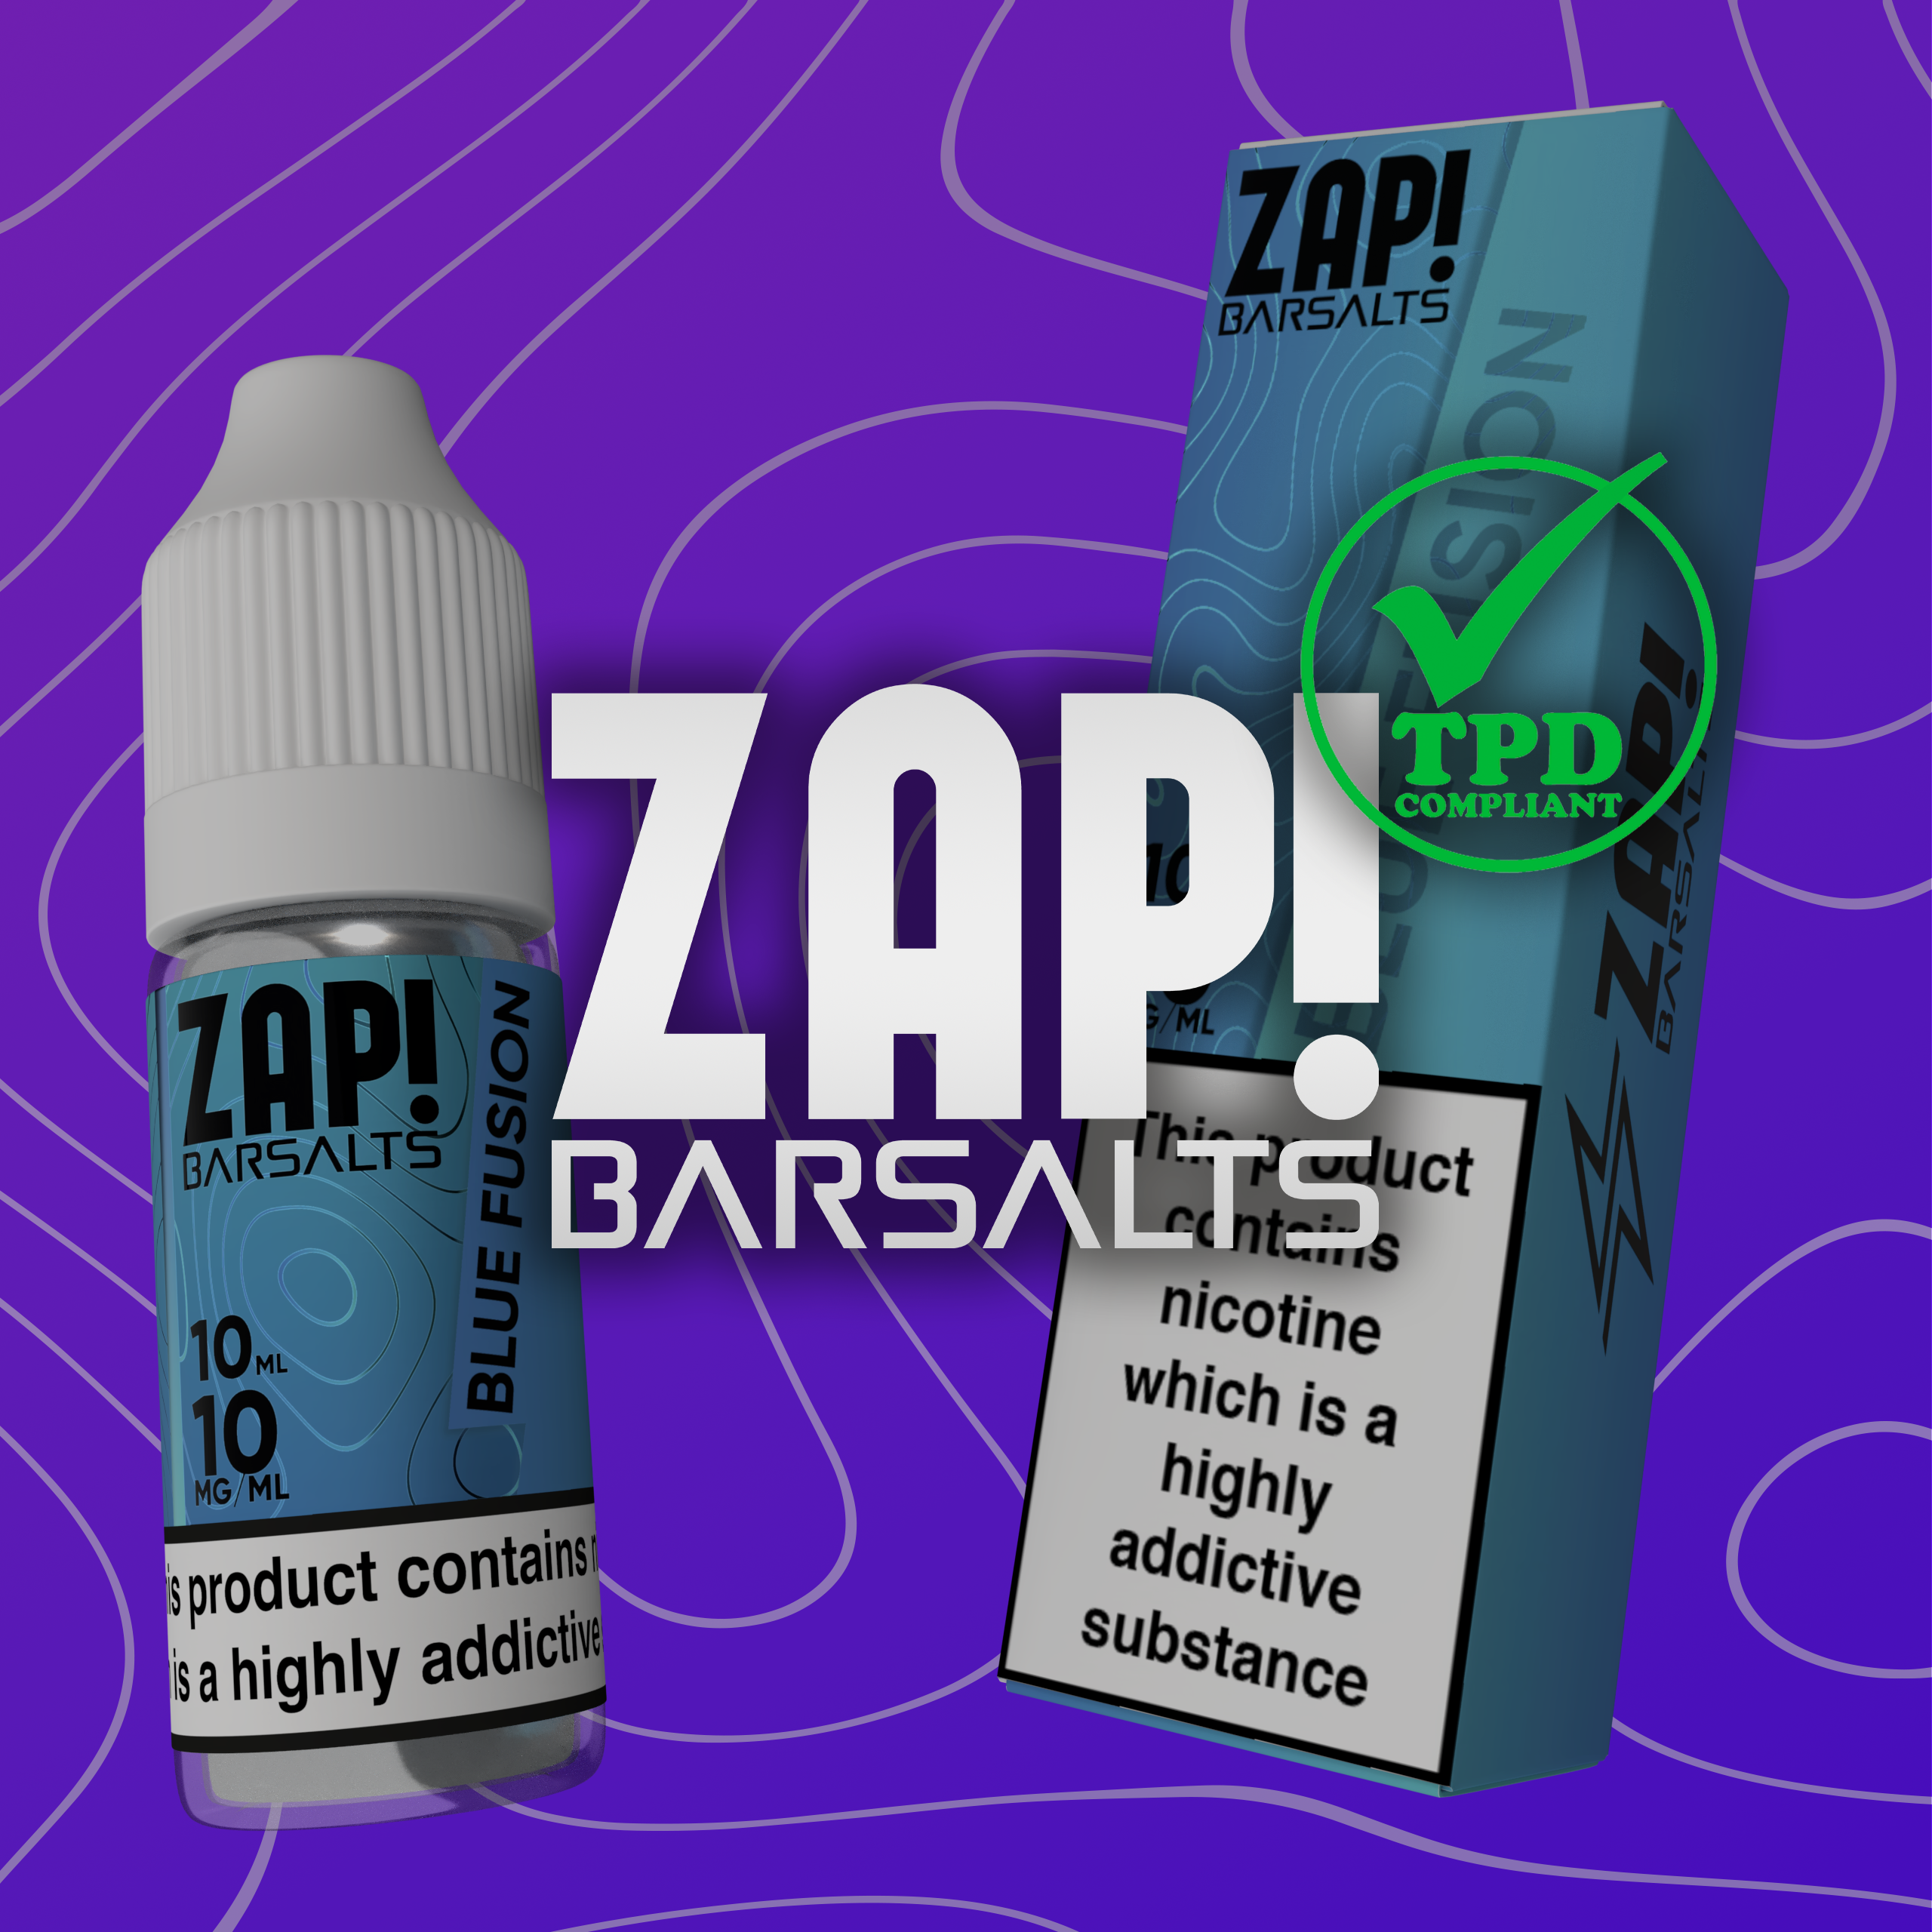 TPD Compliance and ZAP! Bar Salts: A Commitment to Quality